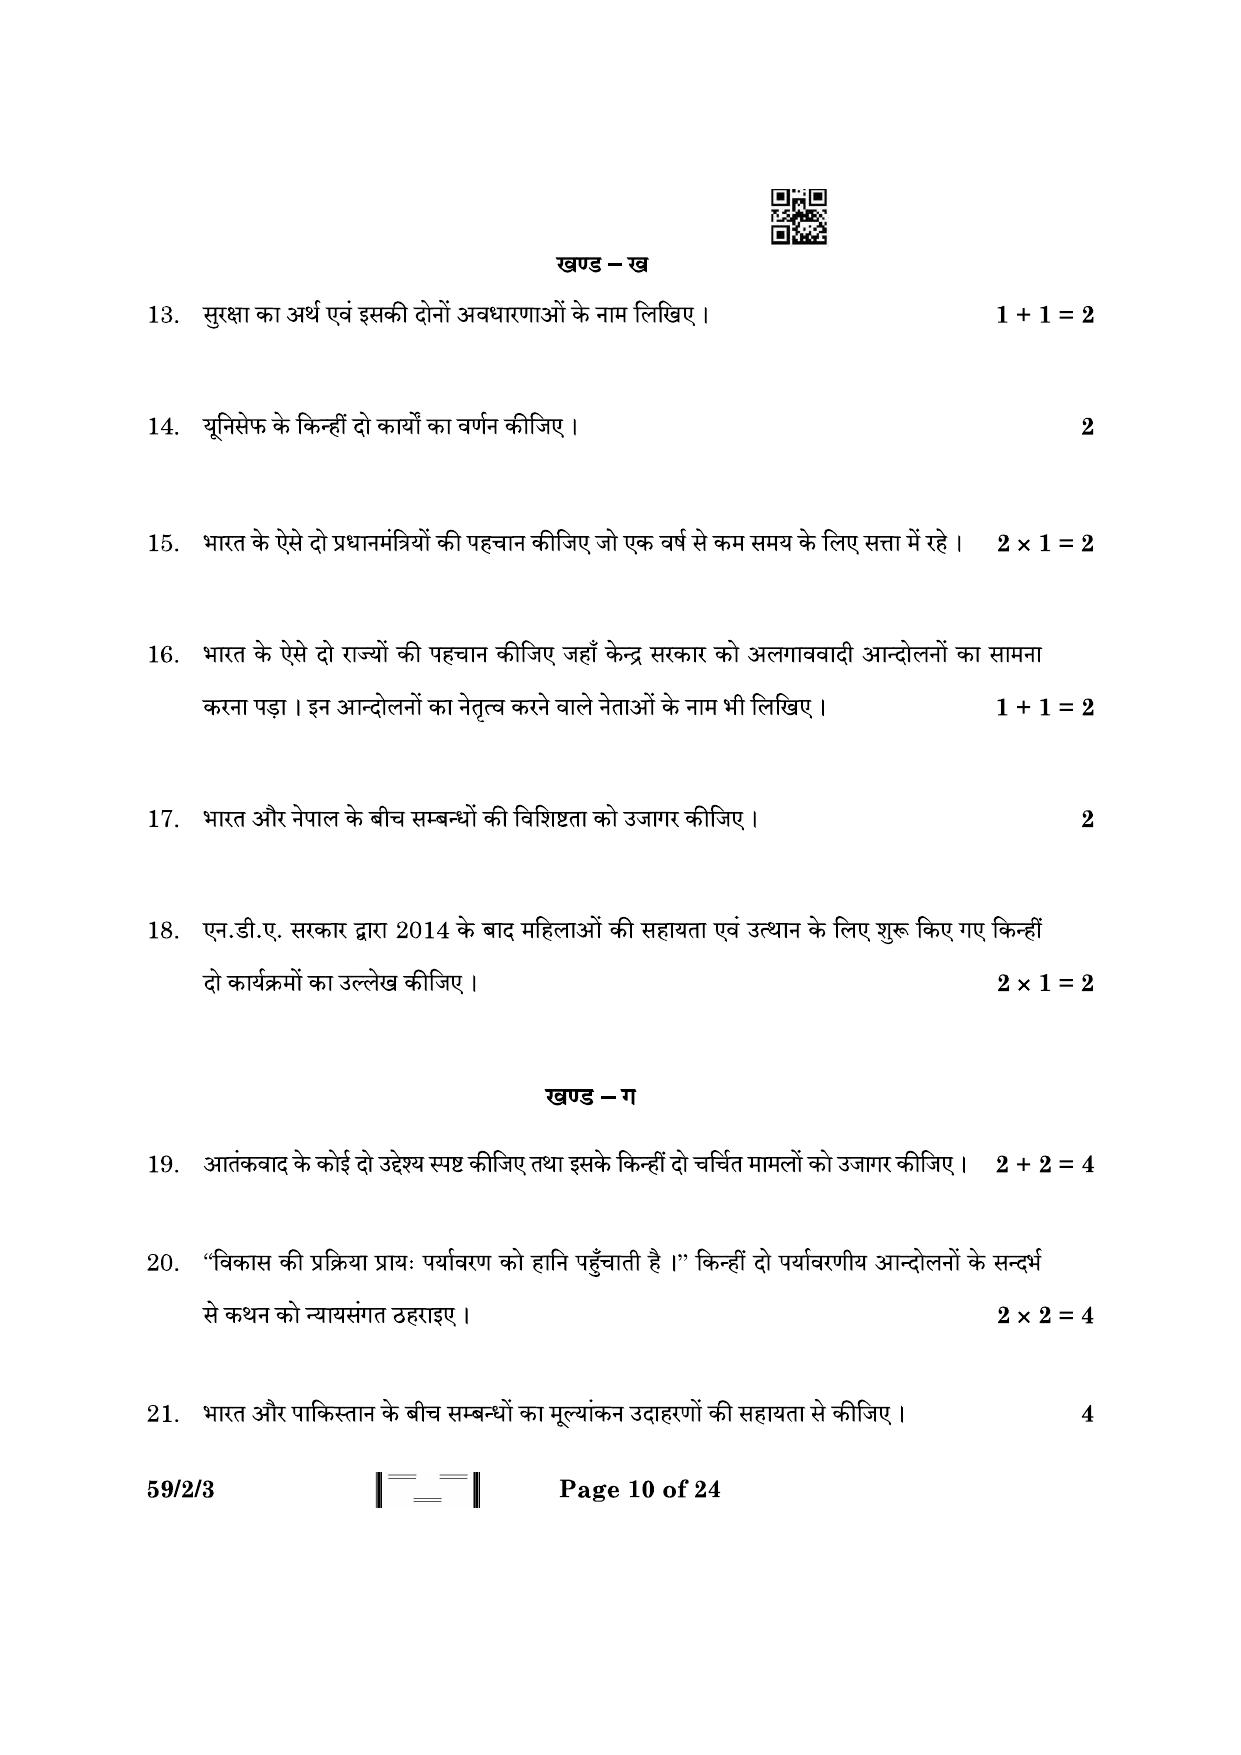 CBSE Class 12 59-2-3 Political Science 2023 Question Paper - Page 10